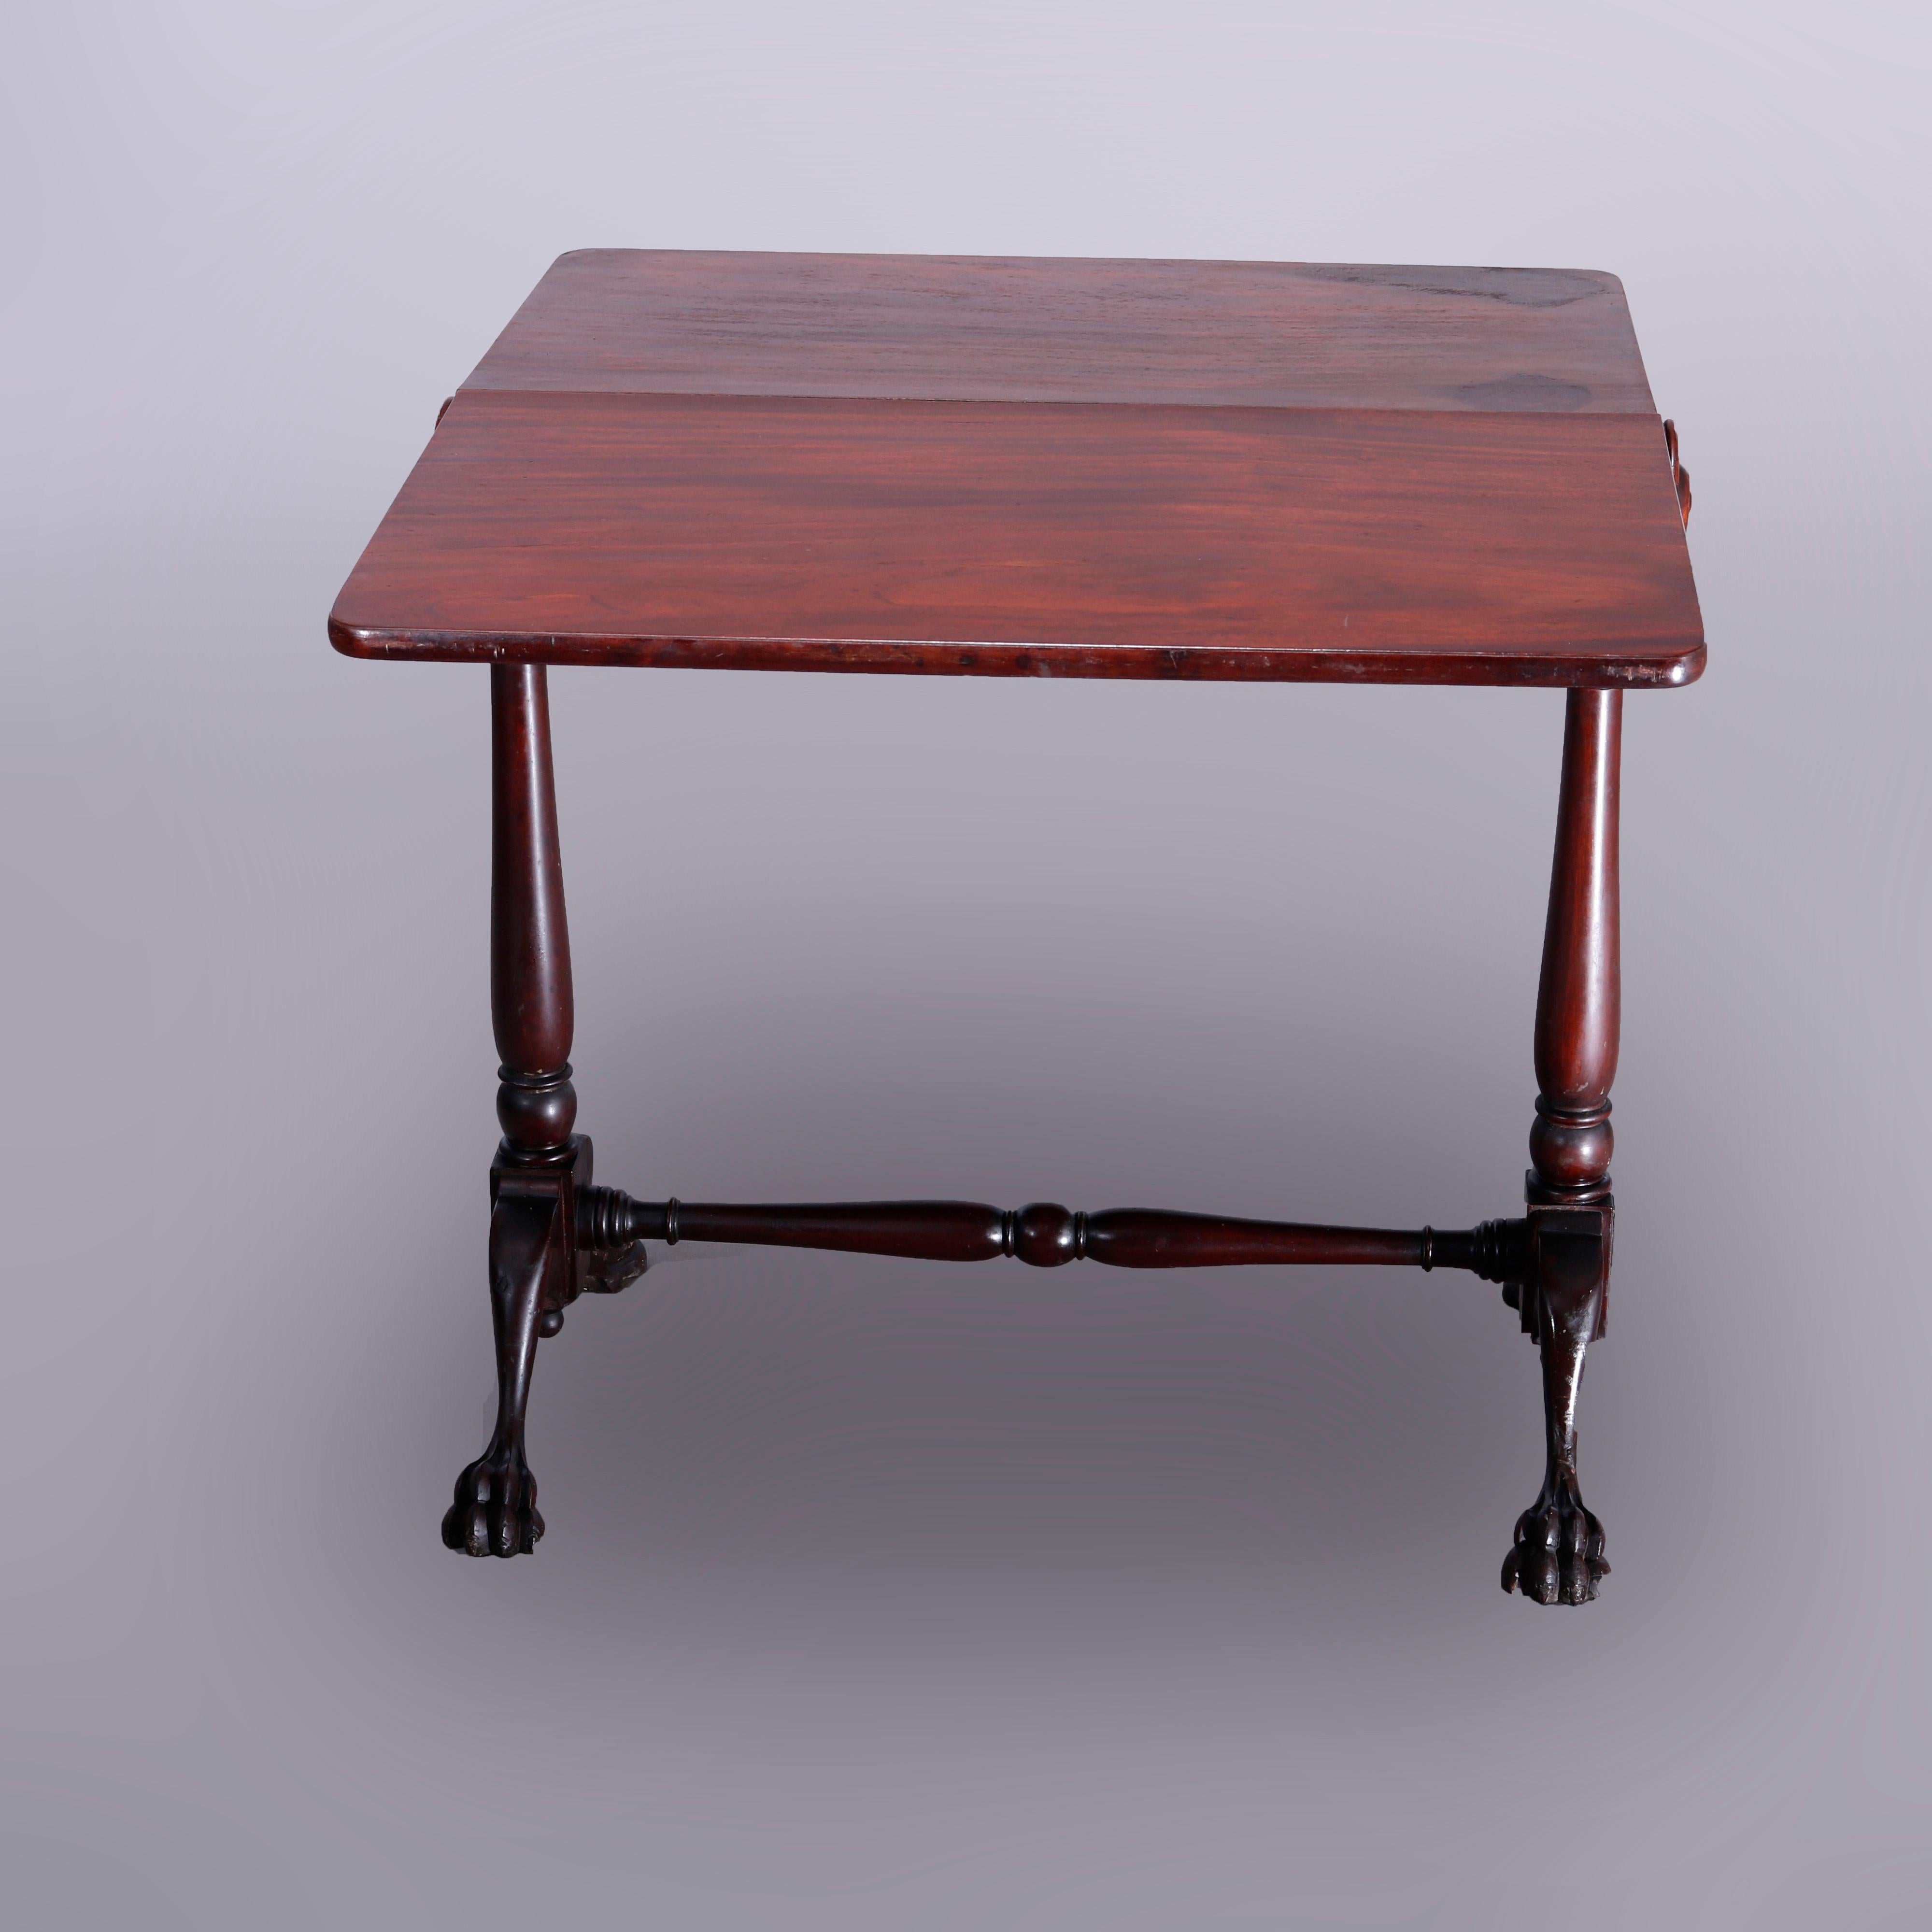 American Empire Antique Empire Carved Mahogany Claw Foot Napkin Fold Drop Leaf Table, c1890